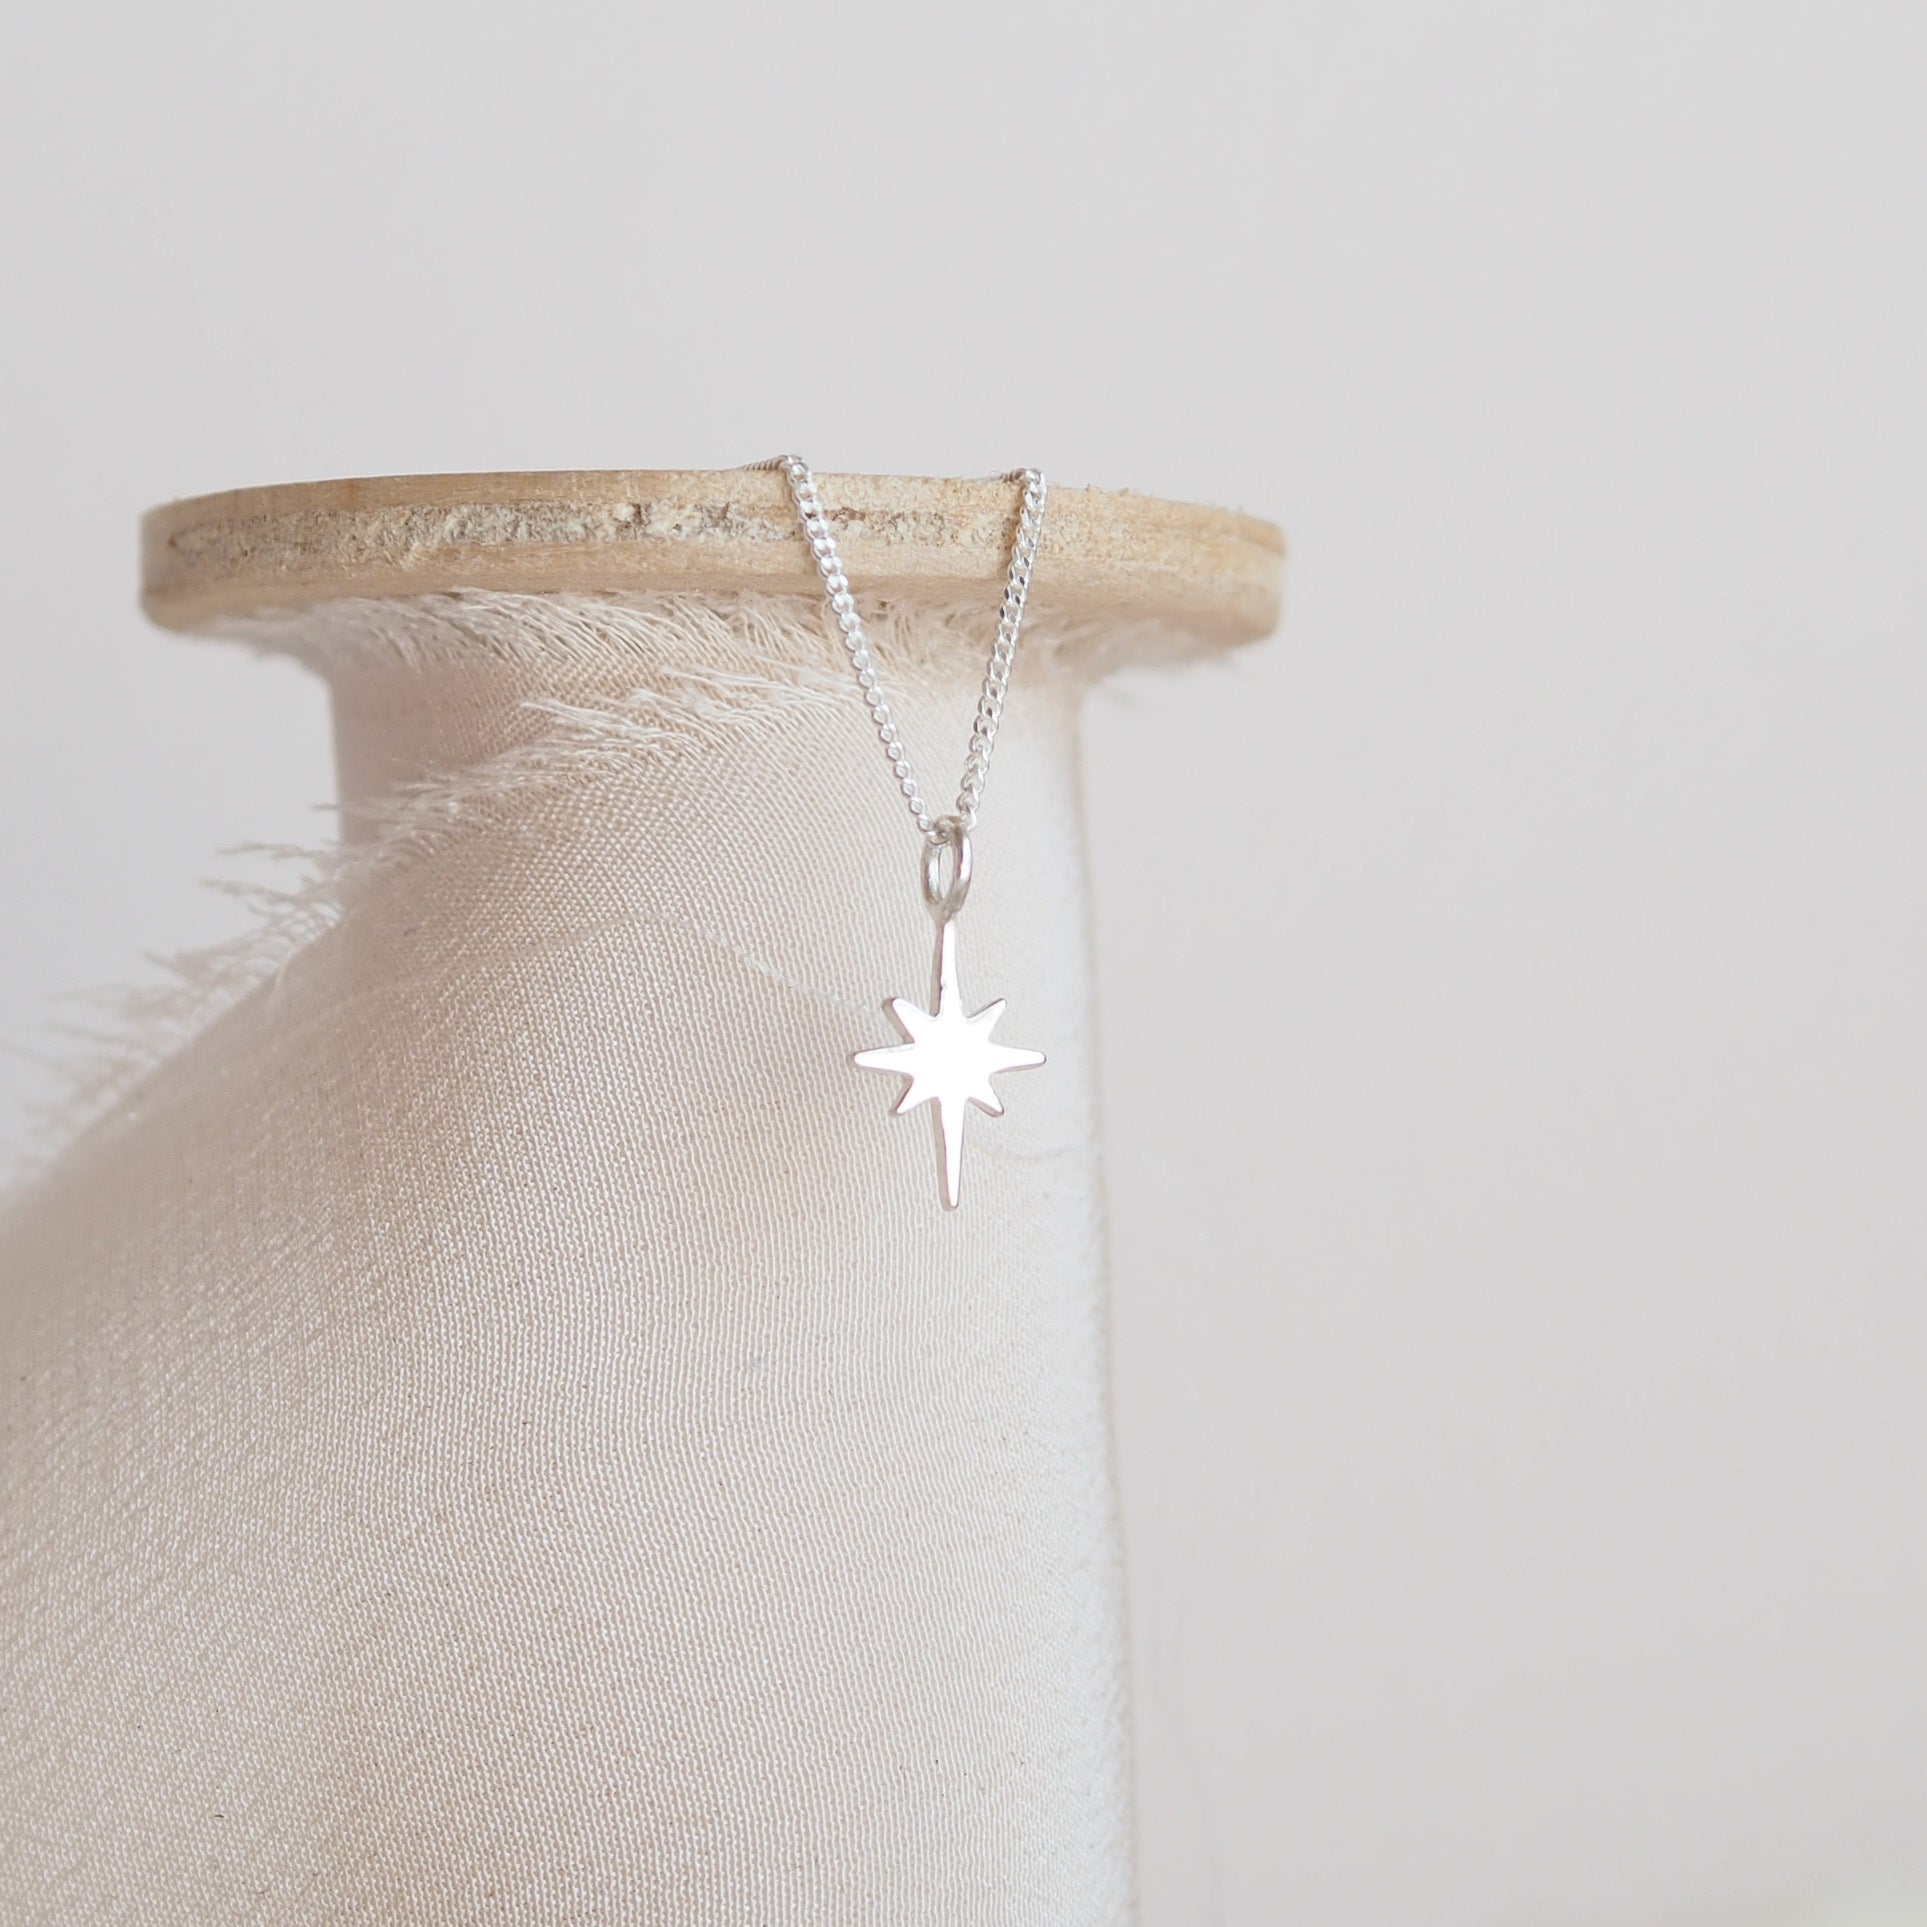 North Star Necklace in Solid 9ct Gold